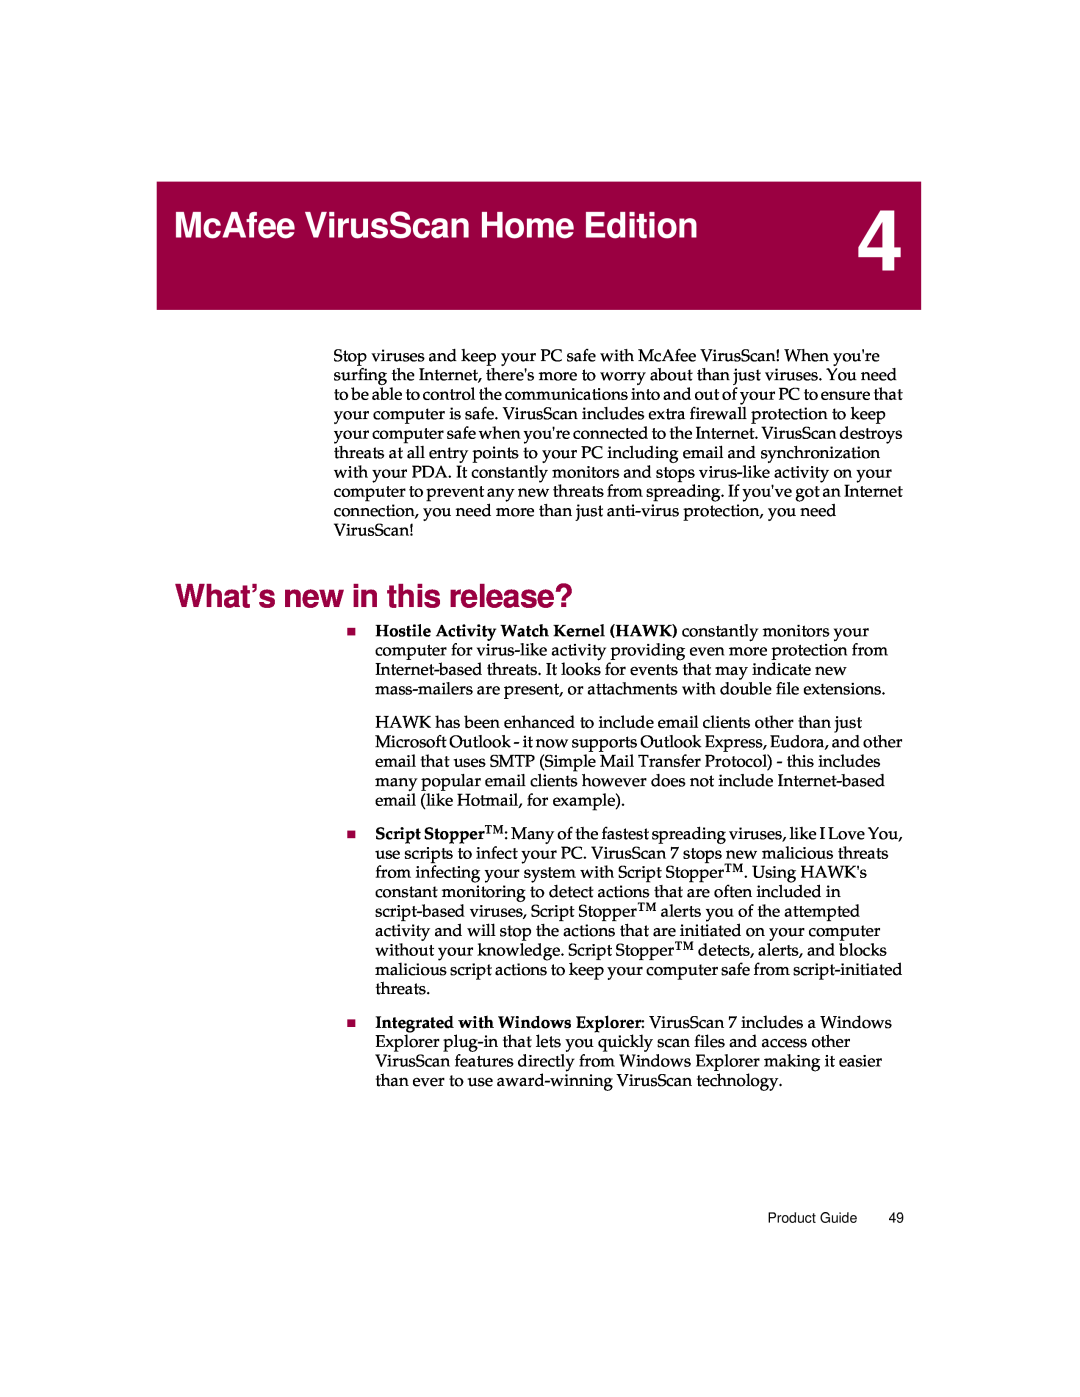 McAfee 5 manual McAfee VirusScan Home Edition, What’s new in this release?, Product Guide 